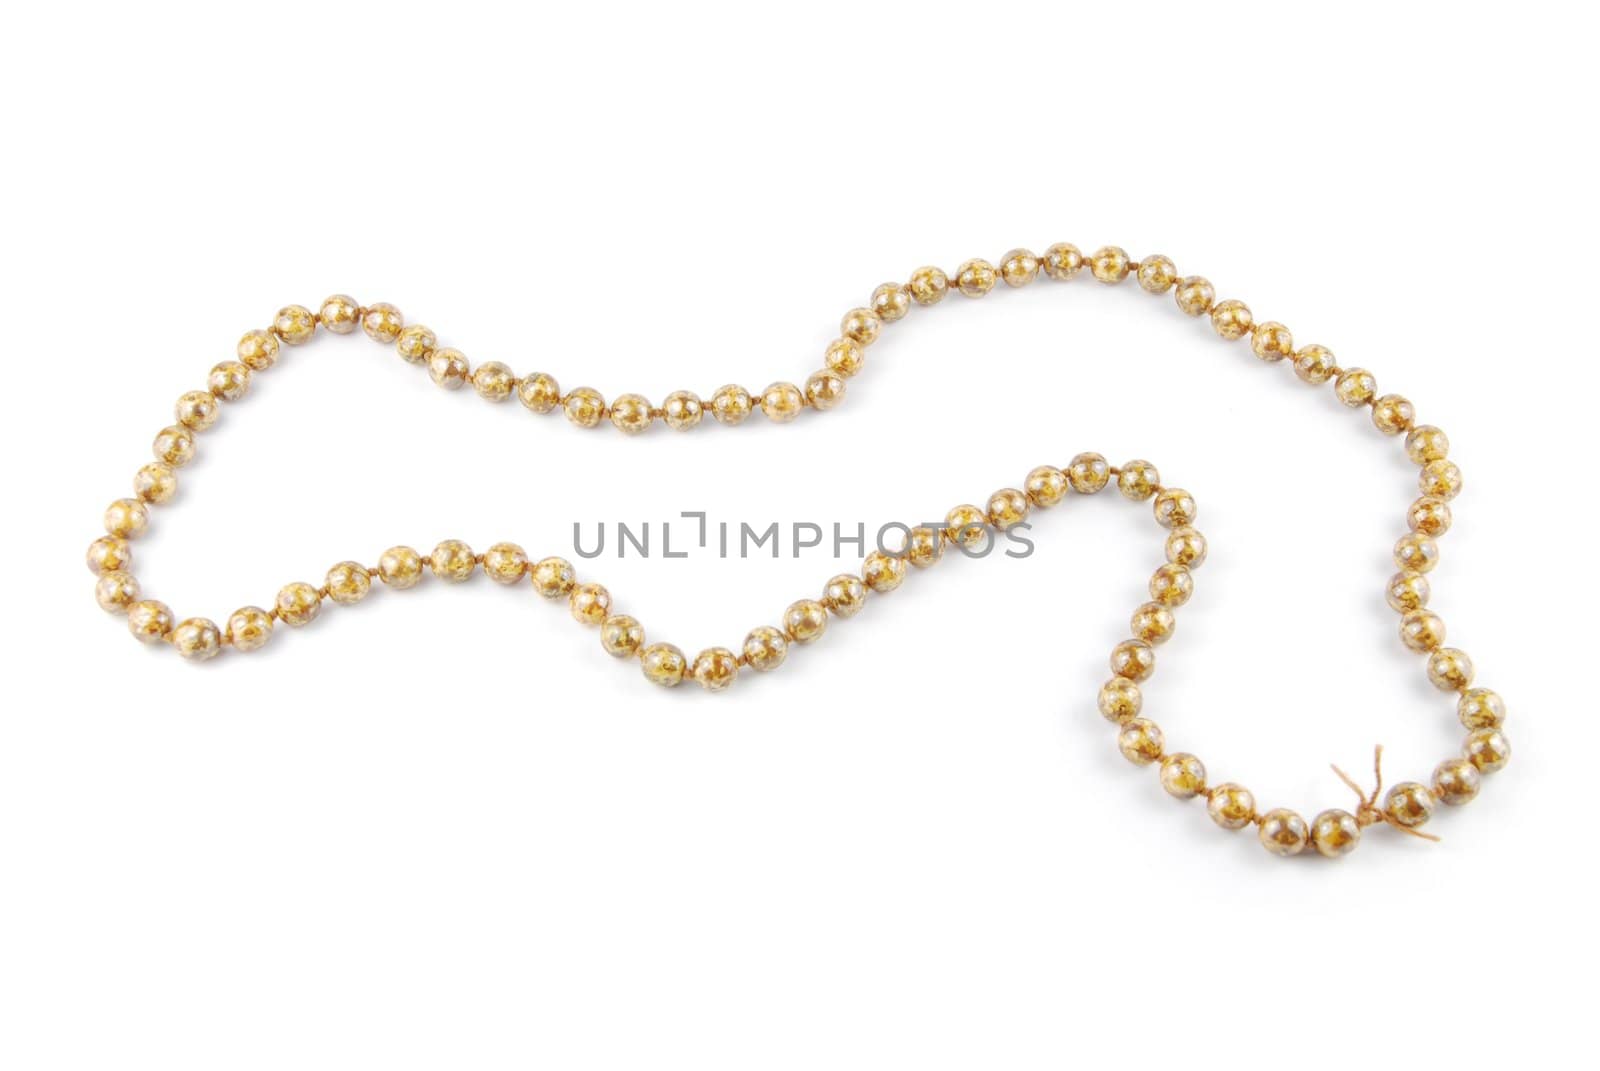 F1 racing track with a pearl necklace isolated on a white background
